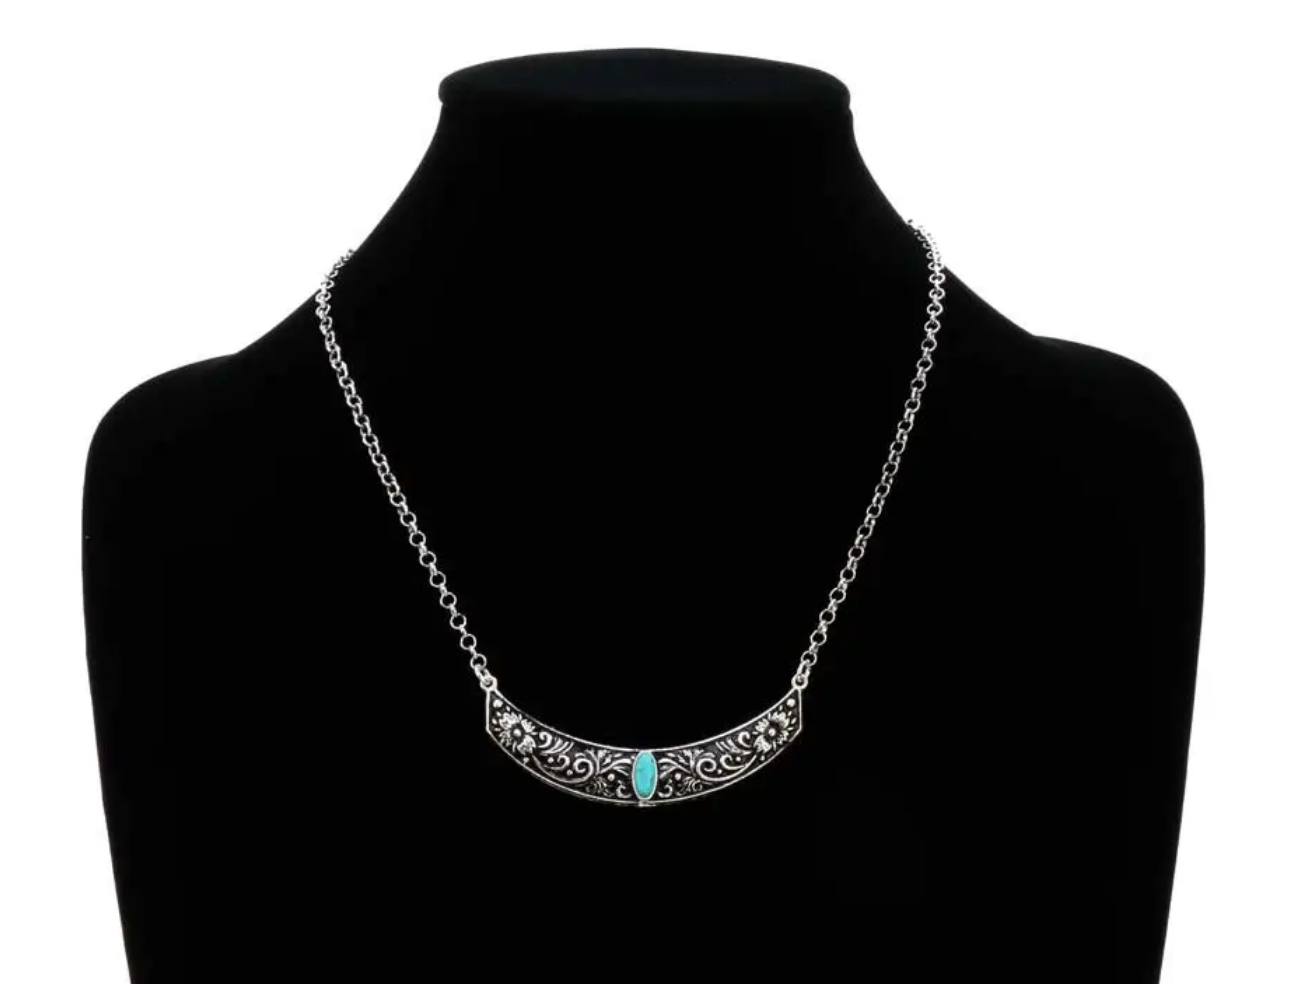 Western Floral Pattern Bar Chain Necklace